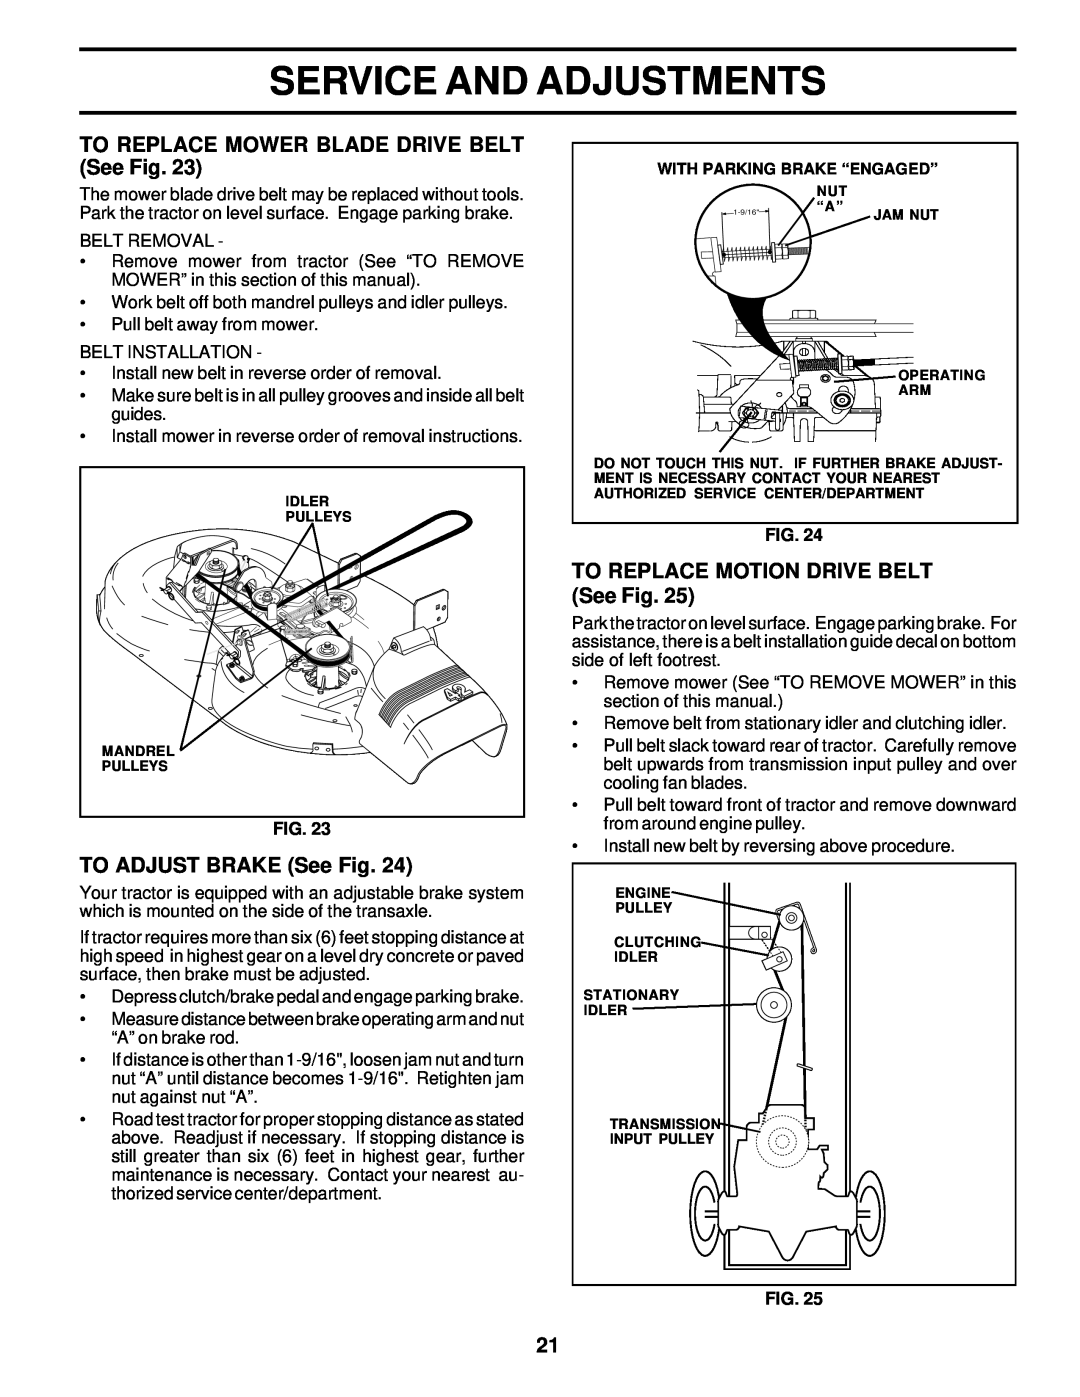 Poulan PR20H42STB TO REPLACE MOWER BLADE DRIVE BELT See Fig, TO ADJUST BRAKE See Fig, TO REPLACE MOTION DRIVE BELT See Fig 